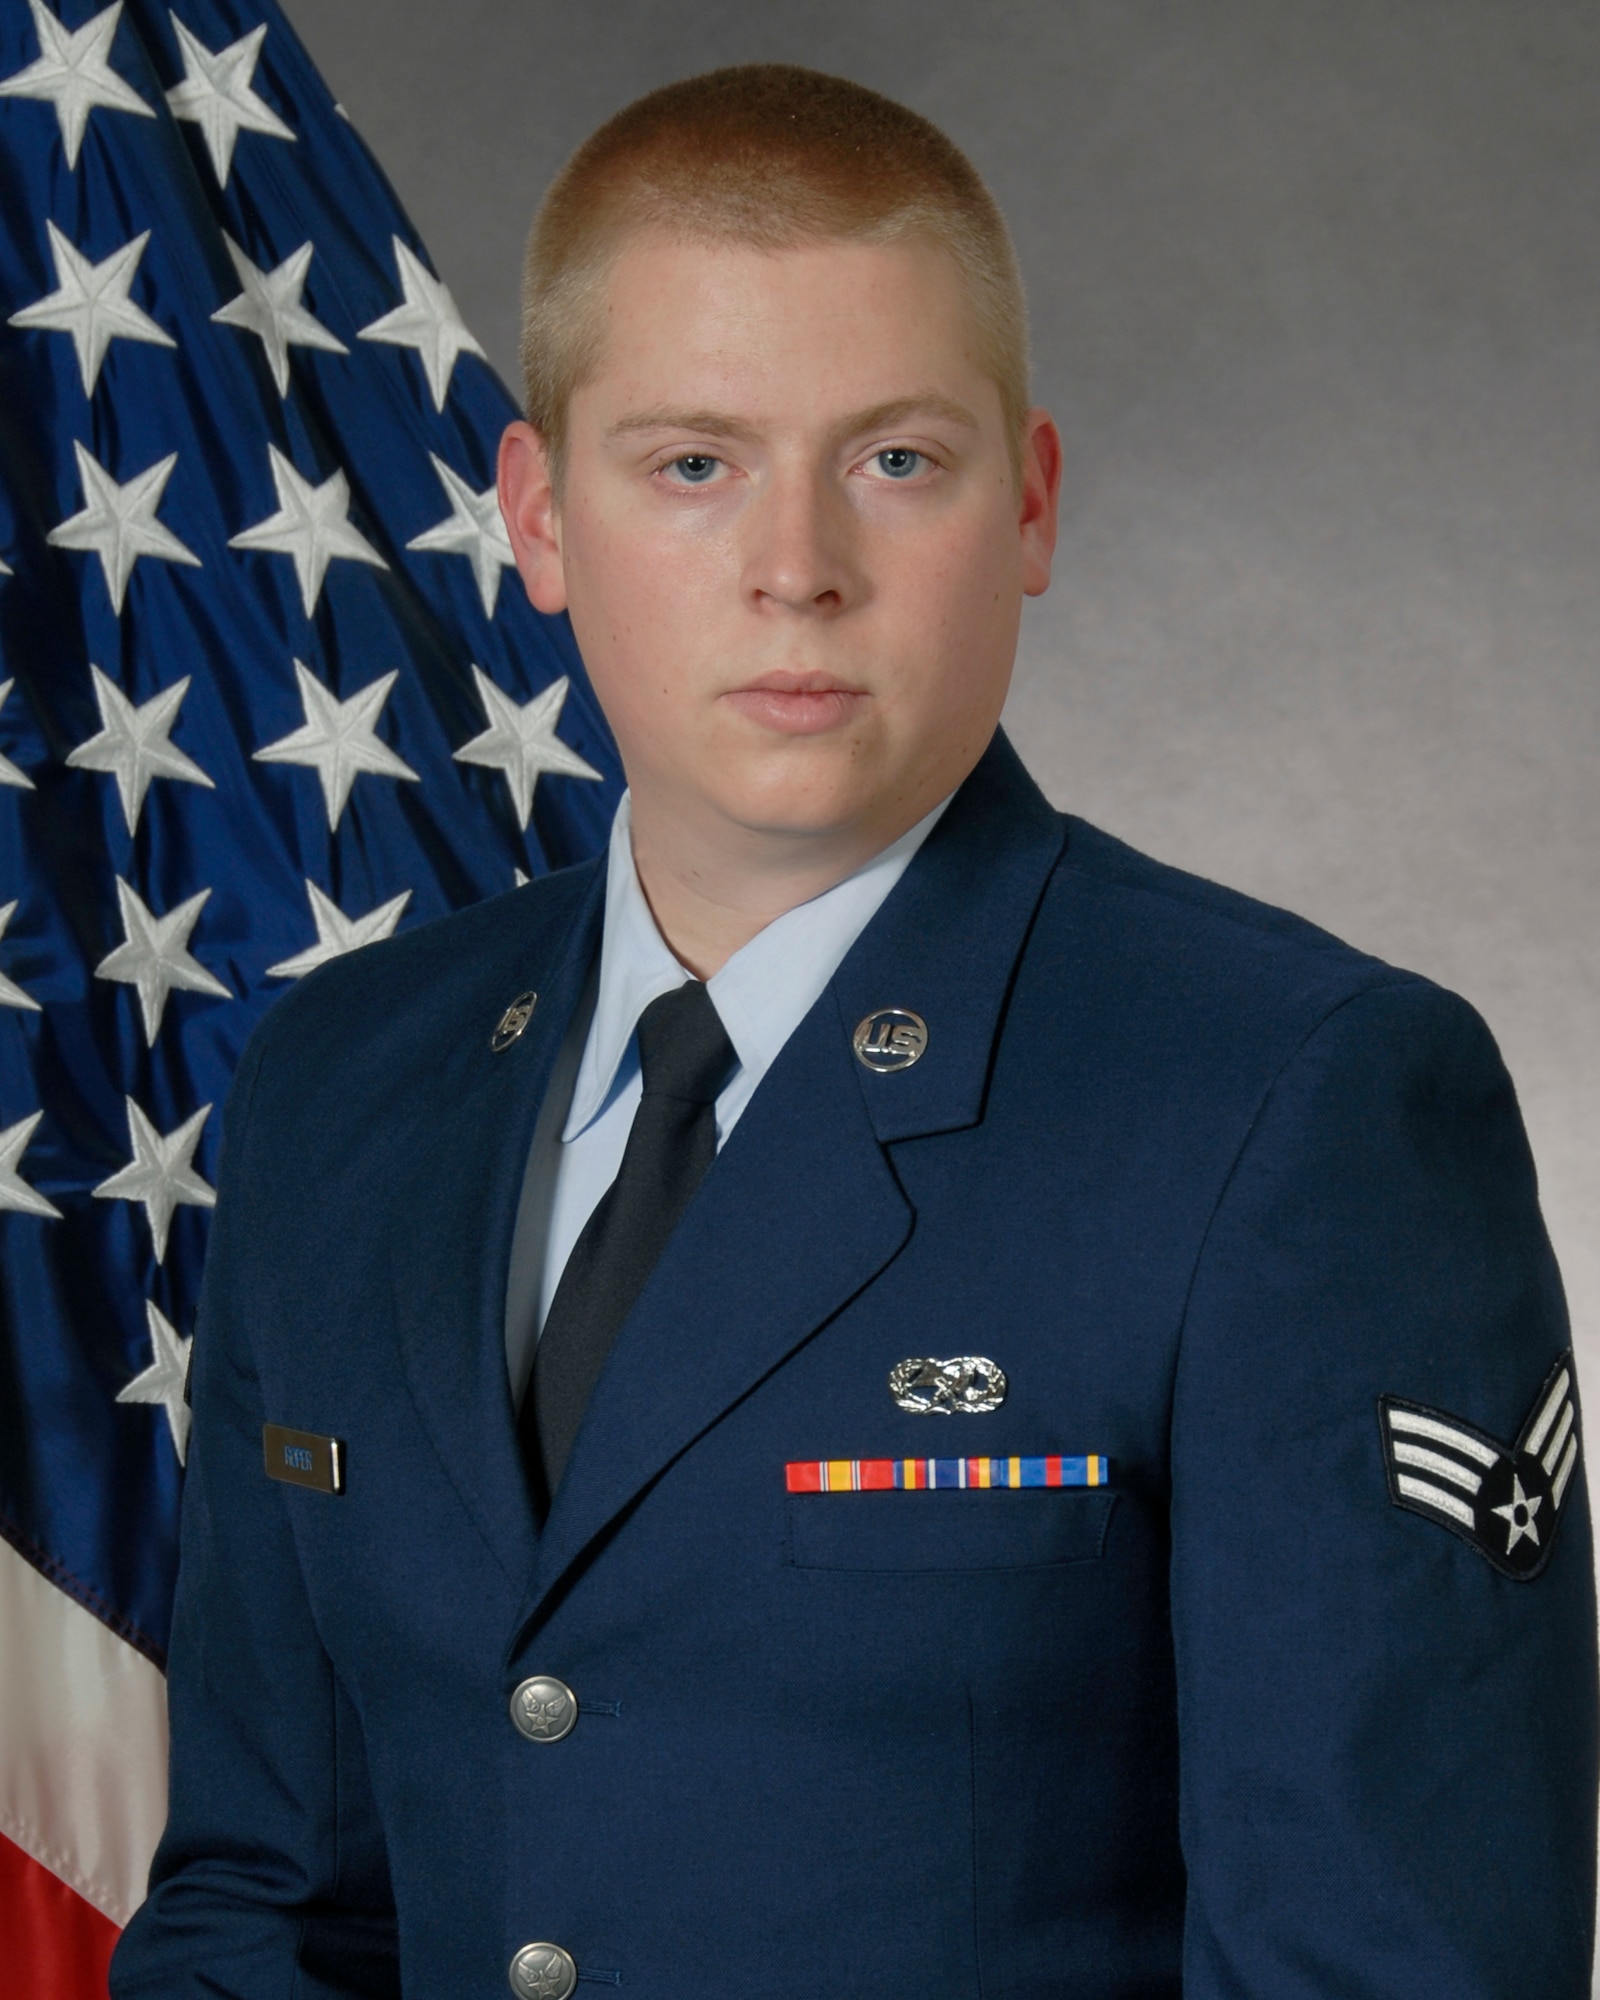 Airman 1st Class Nathan J. Roper, 2nd Munitions Squadron, 2nd Maintenance Group, 2nd Bomb Wing, Barksdale AFB, La., received the Ground Safety Well Done Award, presented in recognition of non-safety Airmen who make a significant contribution that affects overall mishap prevention activities in ground and weapons safety. (U.S. Air Force photo)